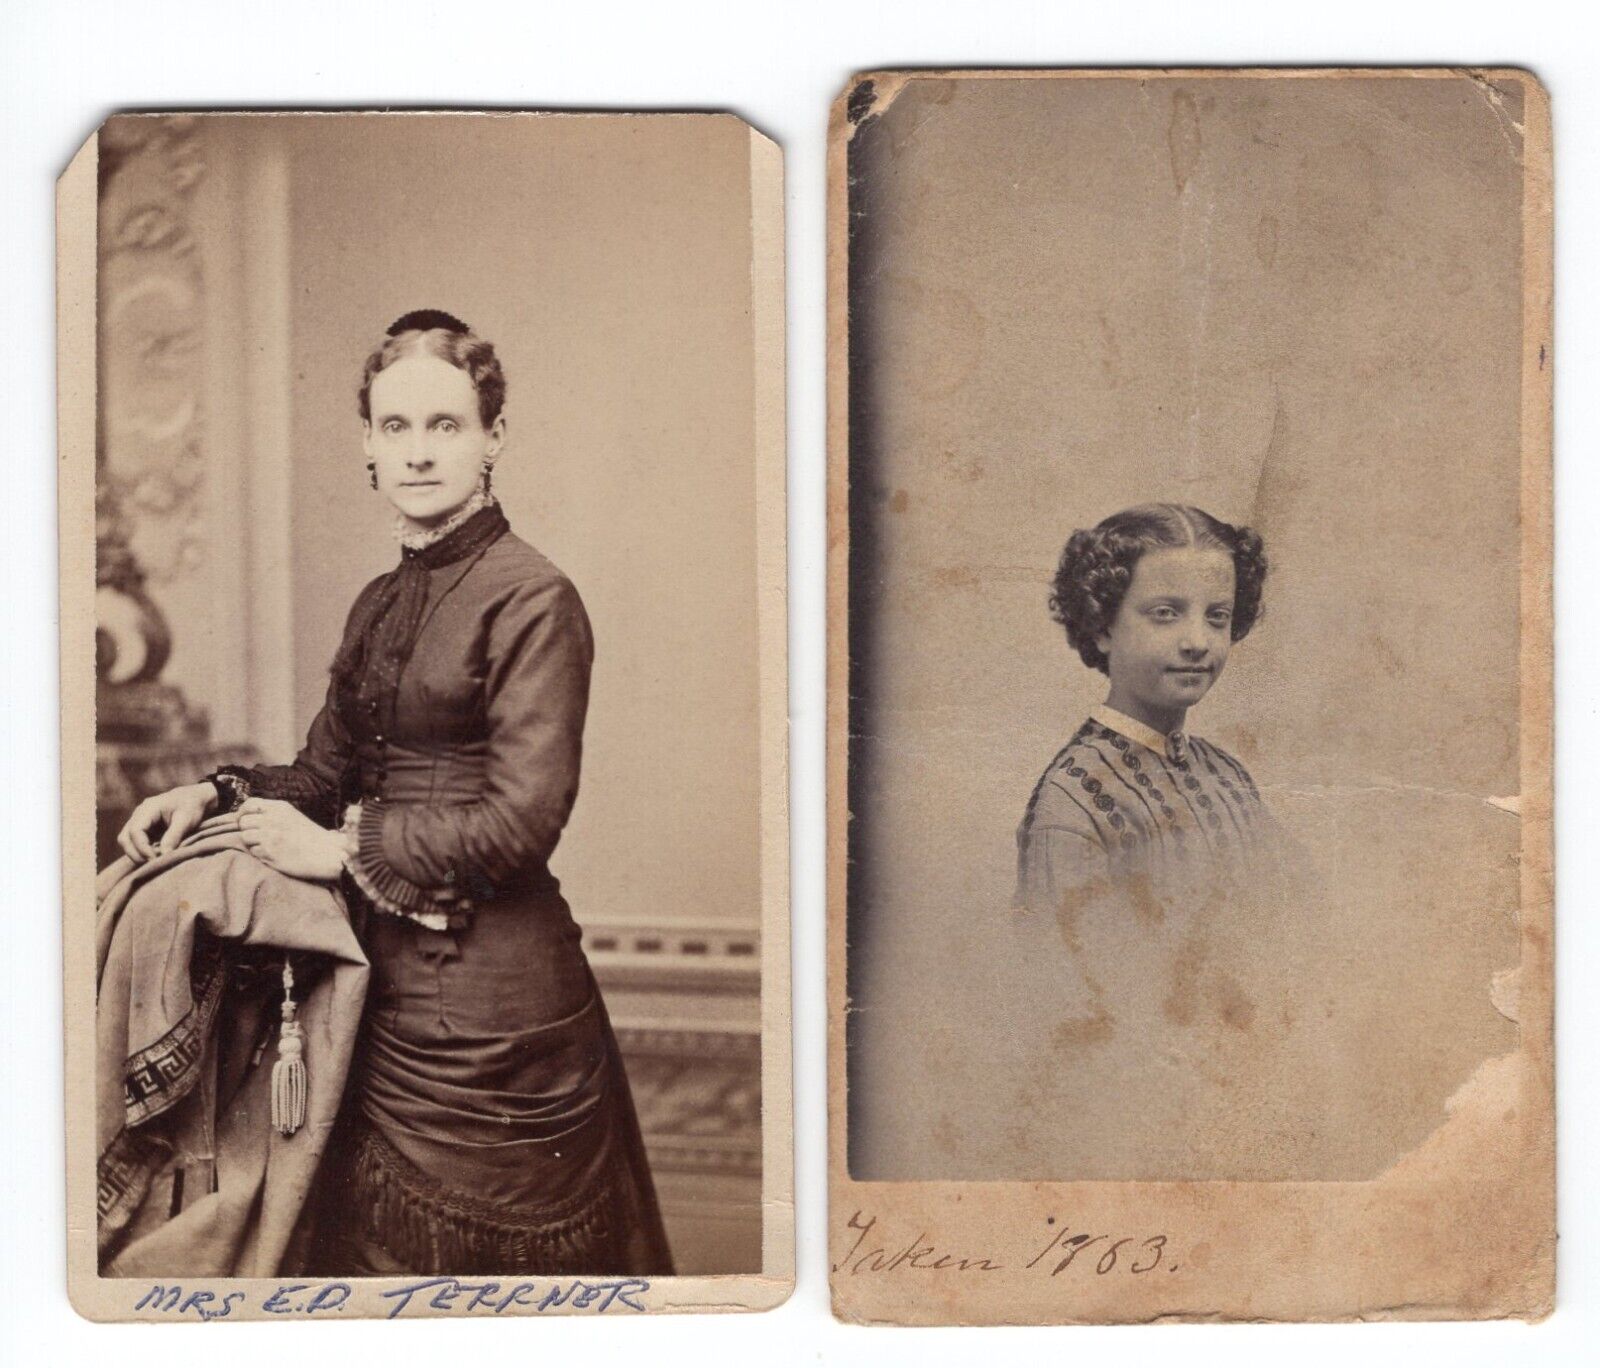 BOSTON MASS CDVs MRS ED TERRNER as a Young Girl  1863 & as an Adult Antique